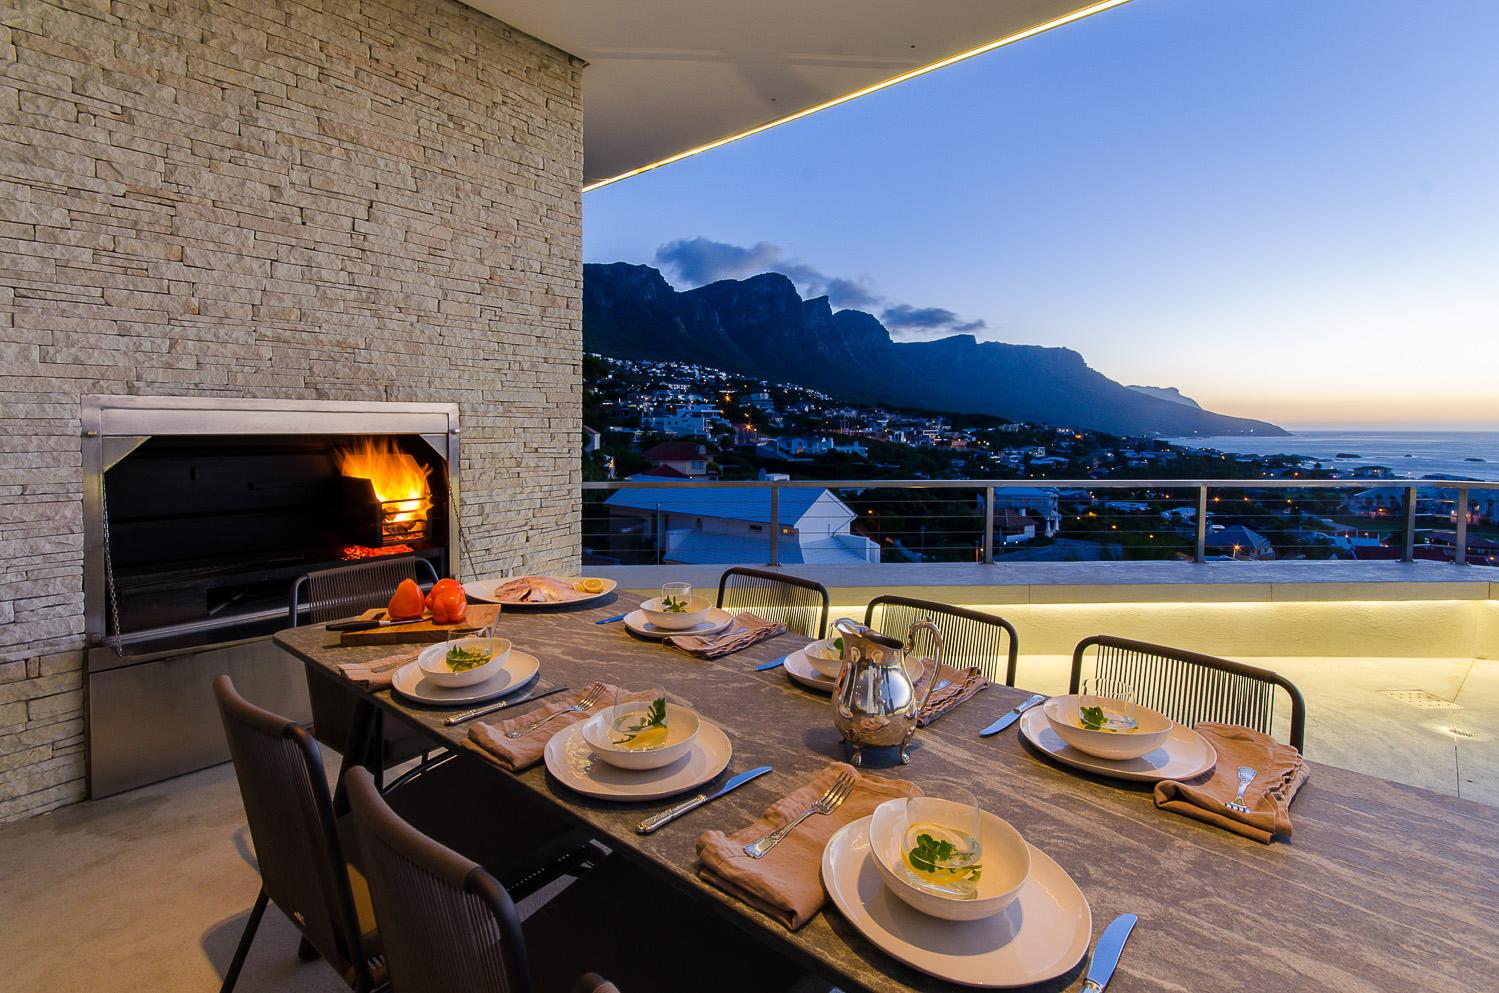 Photo 6 of Strathmore Dream accommodation in Camps Bay, Cape Town with 4 bedrooms and 3 bathrooms